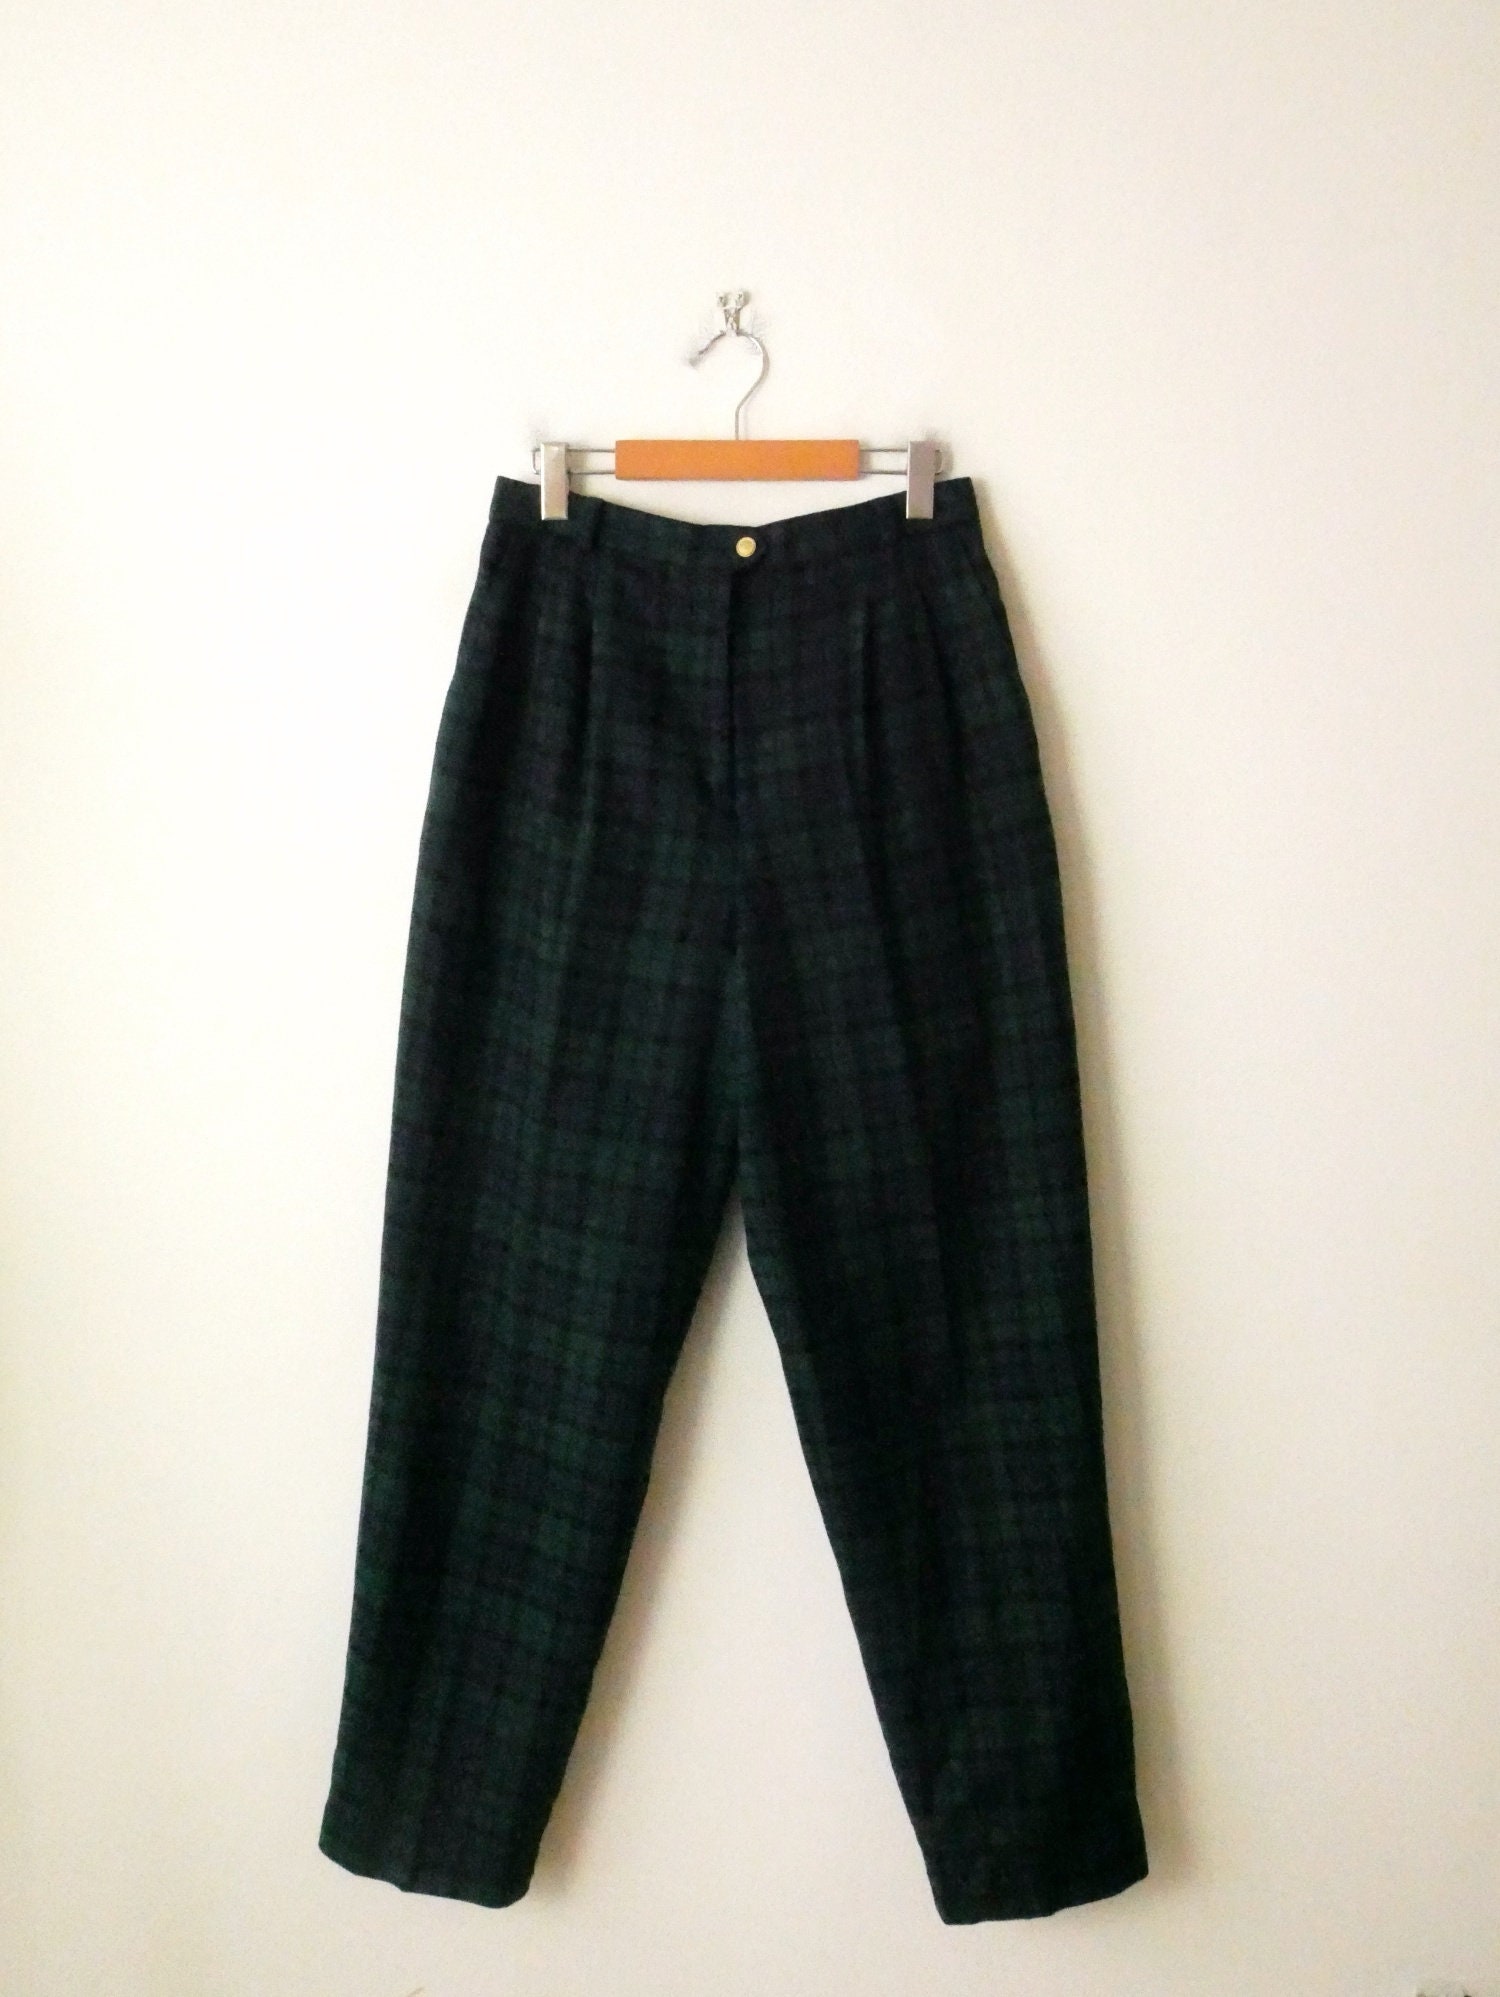 Plaid Oversized Carrot Pants, High-waisted Pants, Button Waist Slant Pocket  Plaid Pants, Tapered Pants, Carrot Trousers, Modest Clothing 